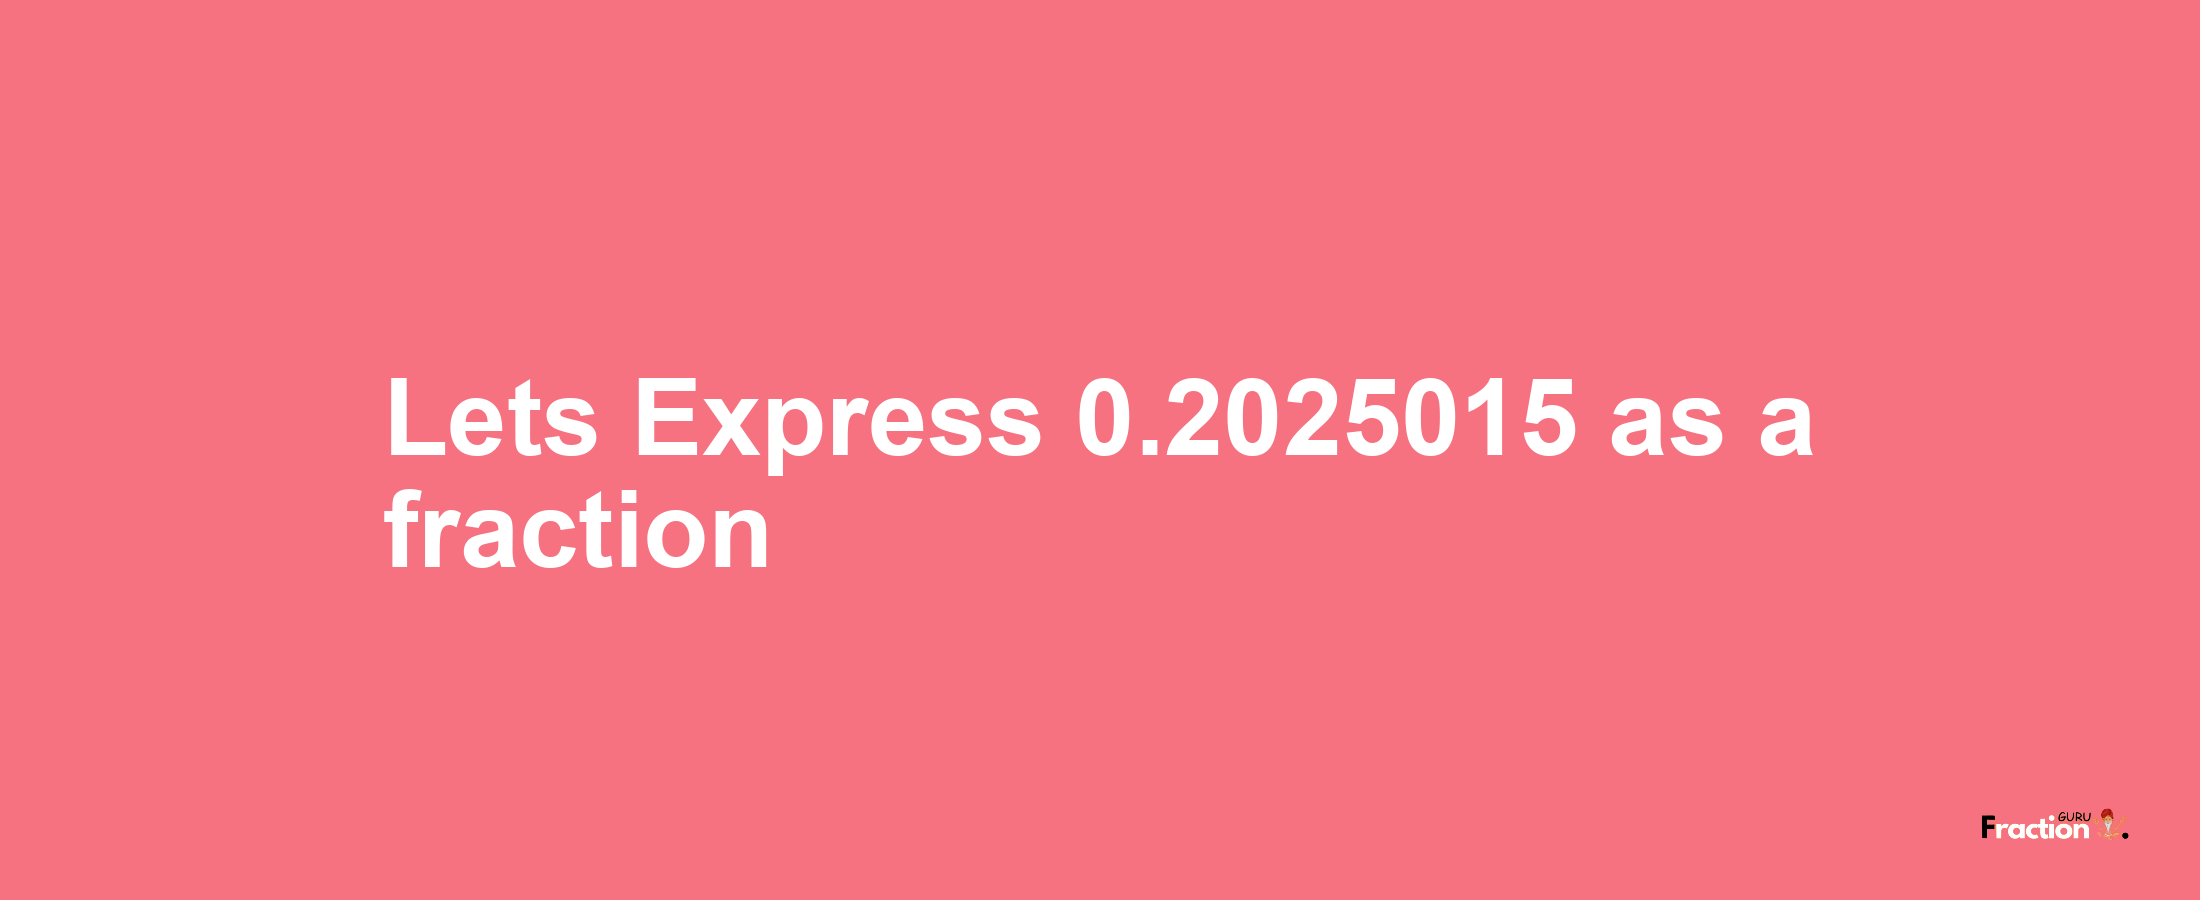 Lets Express 0.2025015 as afraction